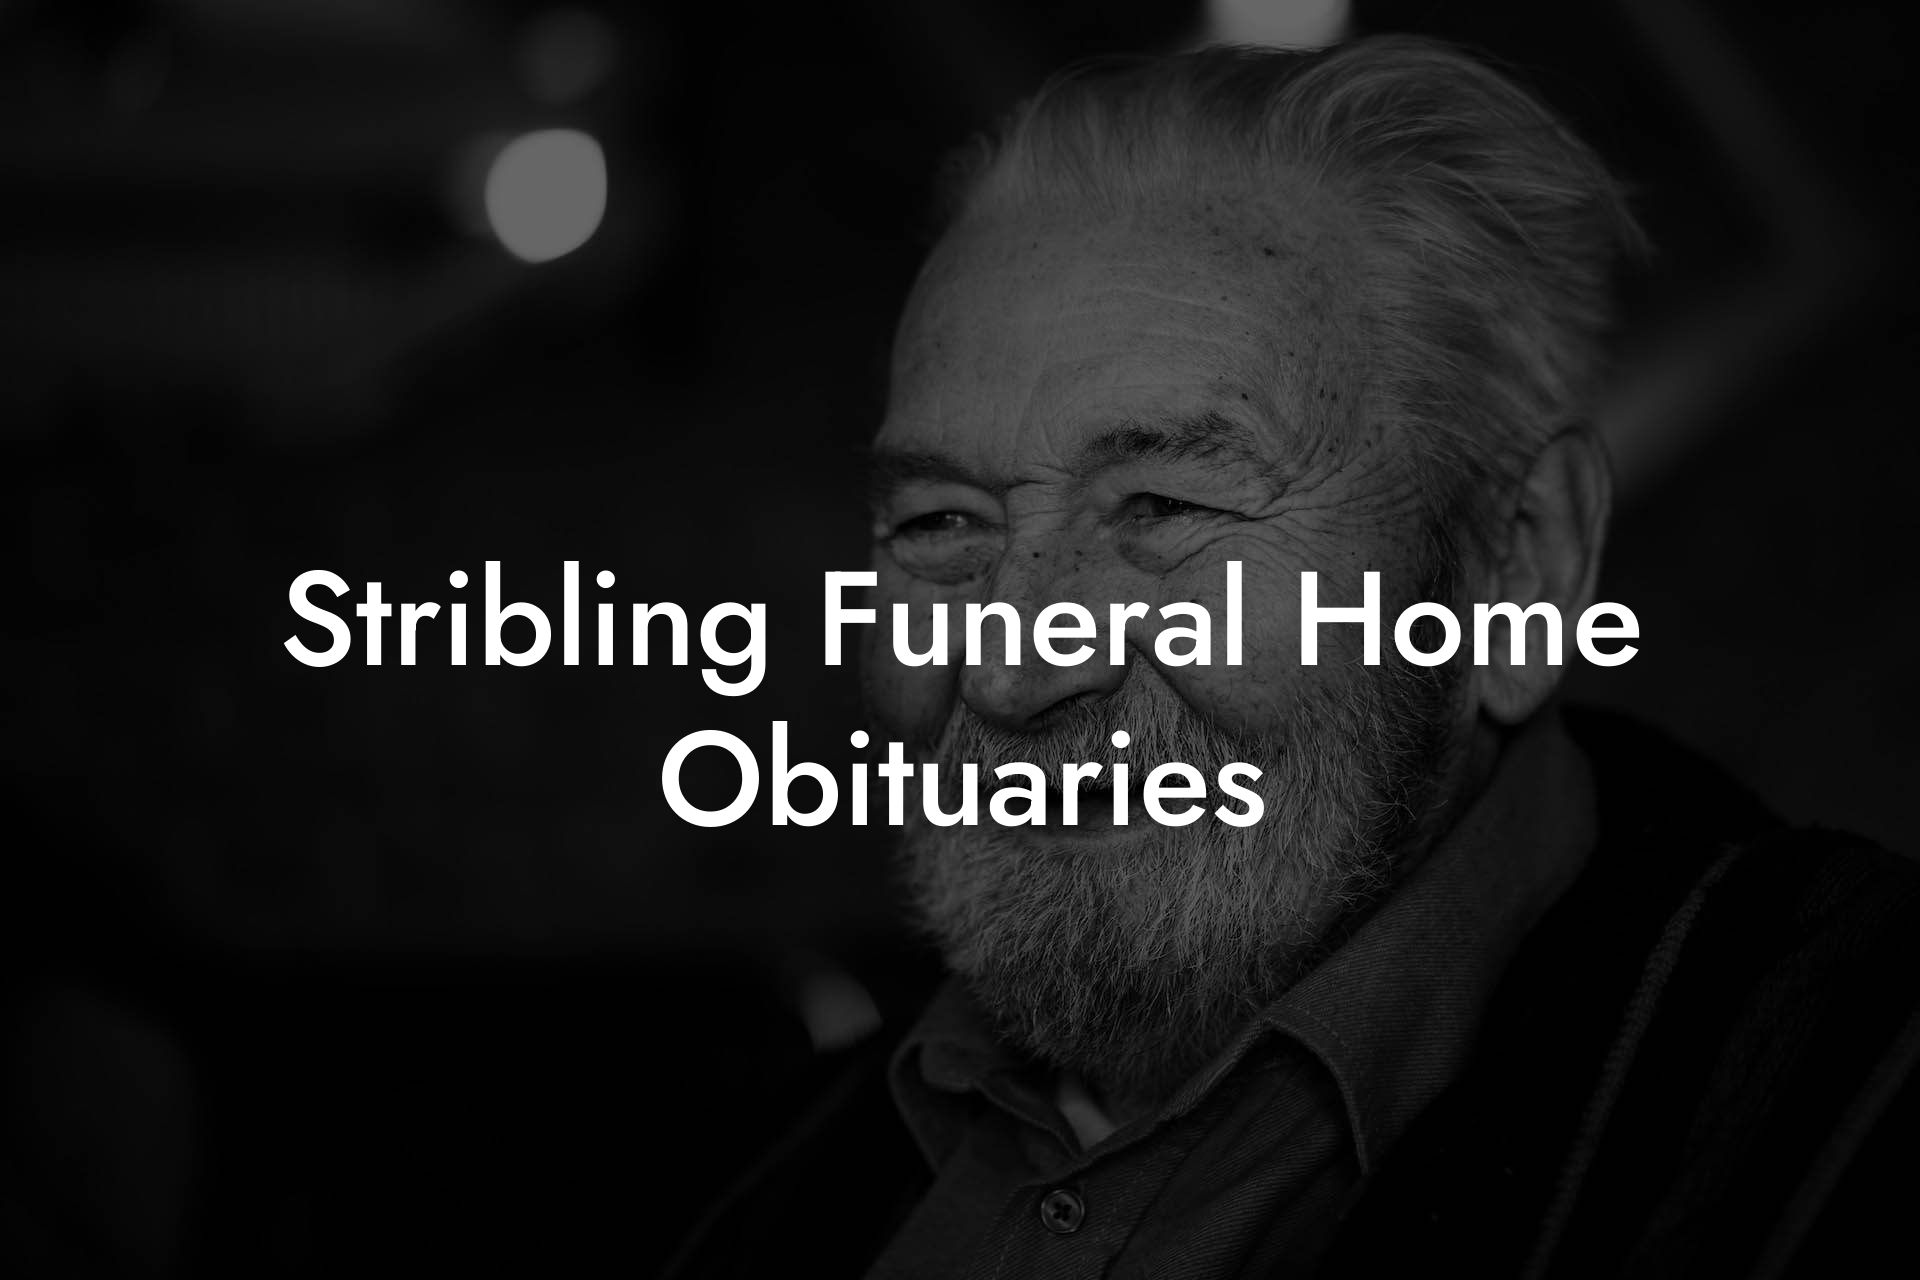 Stribling Funeral Home Obituaries